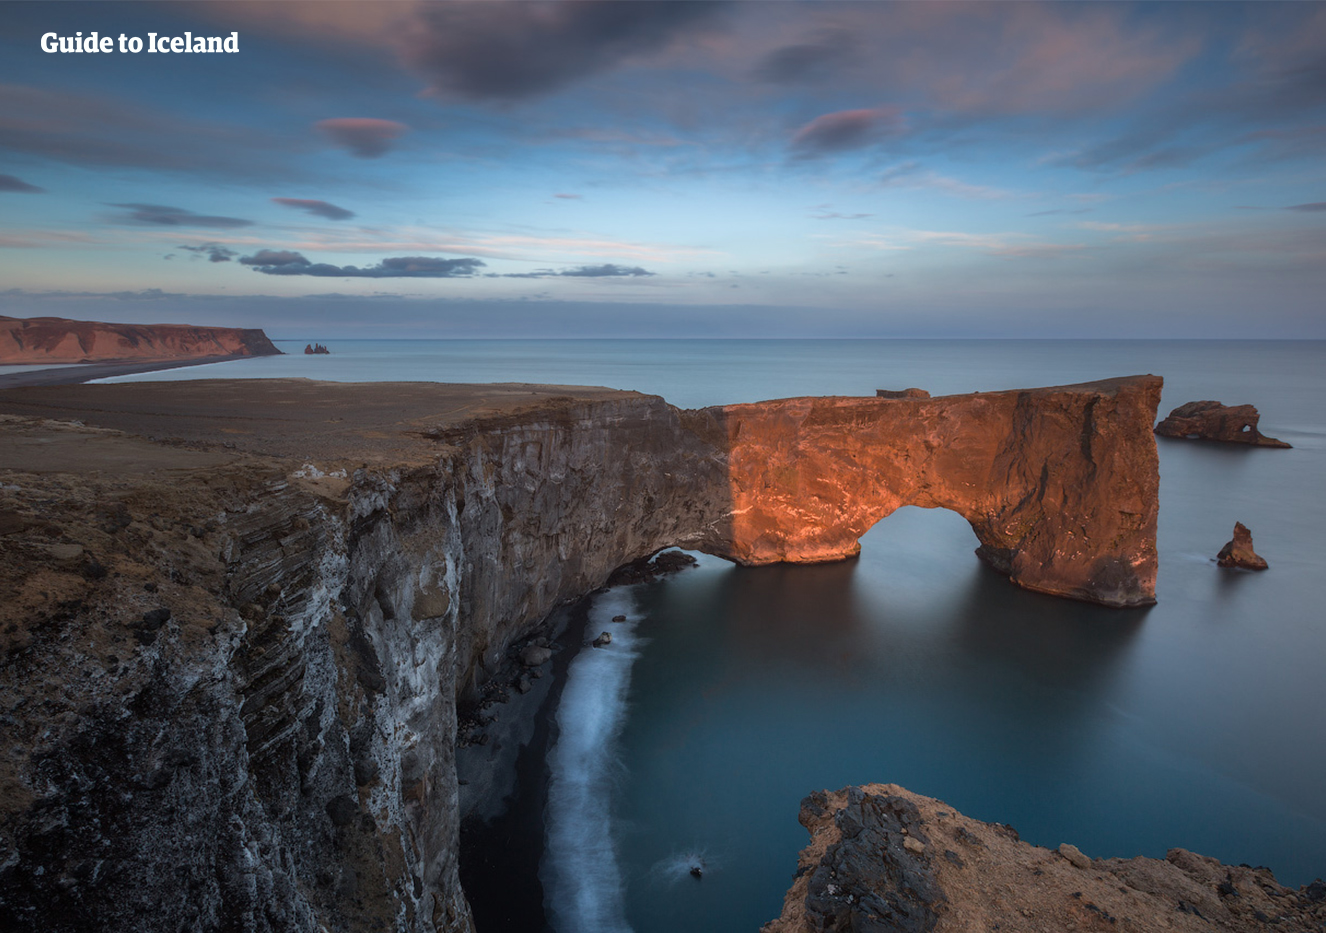 Dyrhólaey, famed for its rock arch and incredible vantage point overlooking the South Coast.